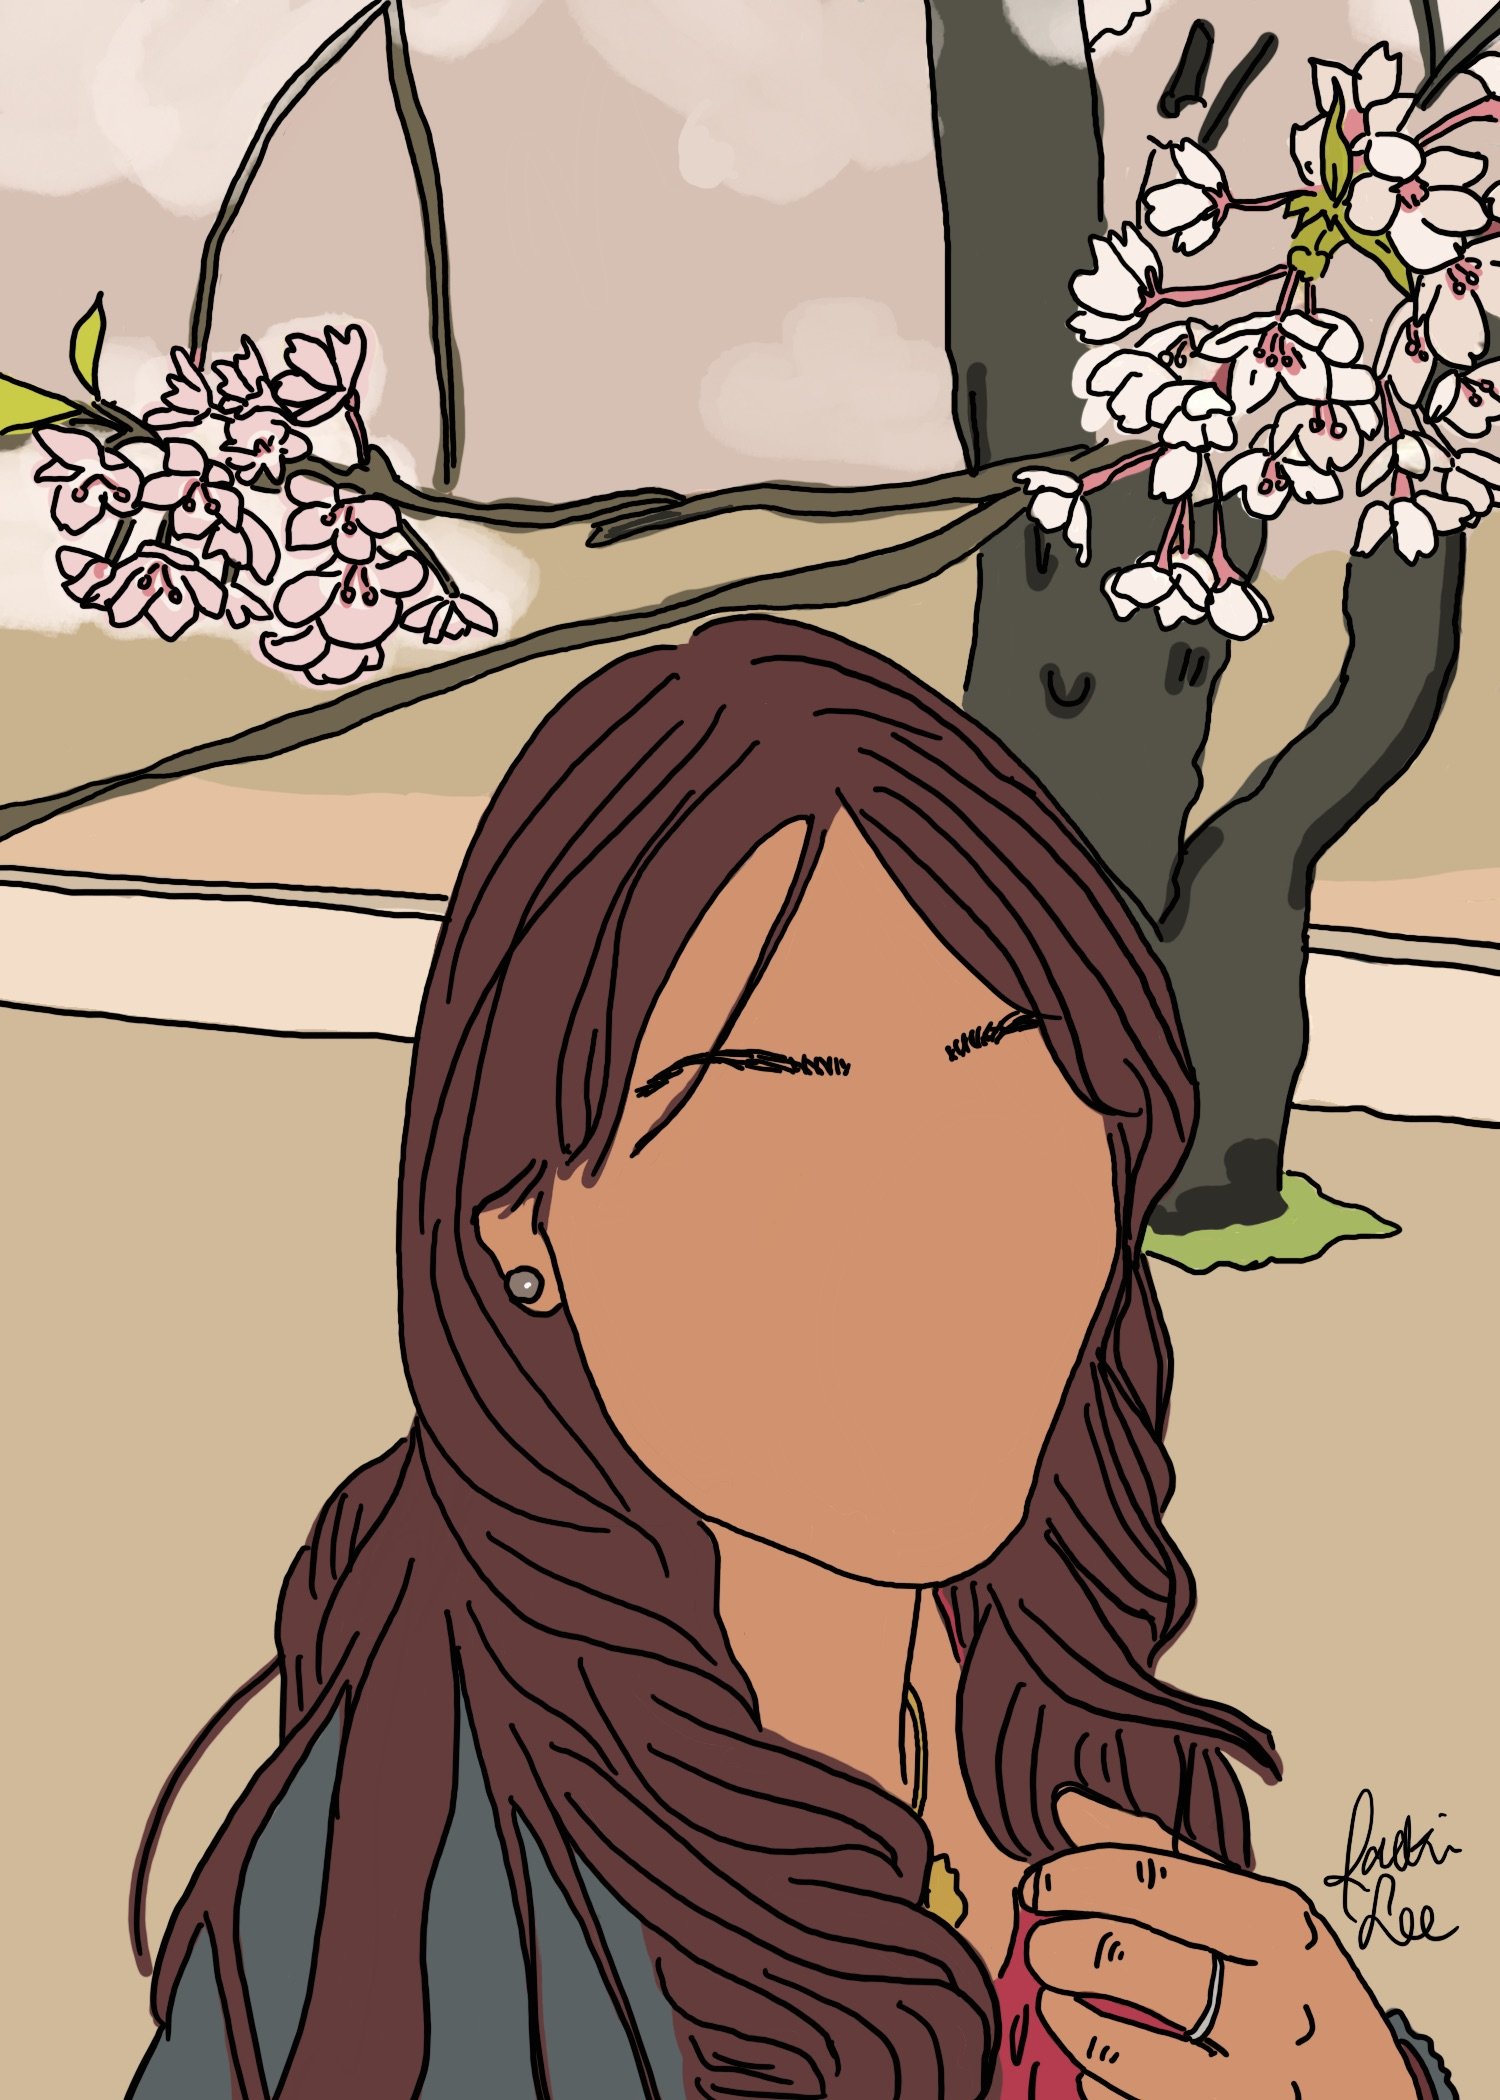 Illustration of Indian Canadian woman with brown har, standing under a blooming tree.